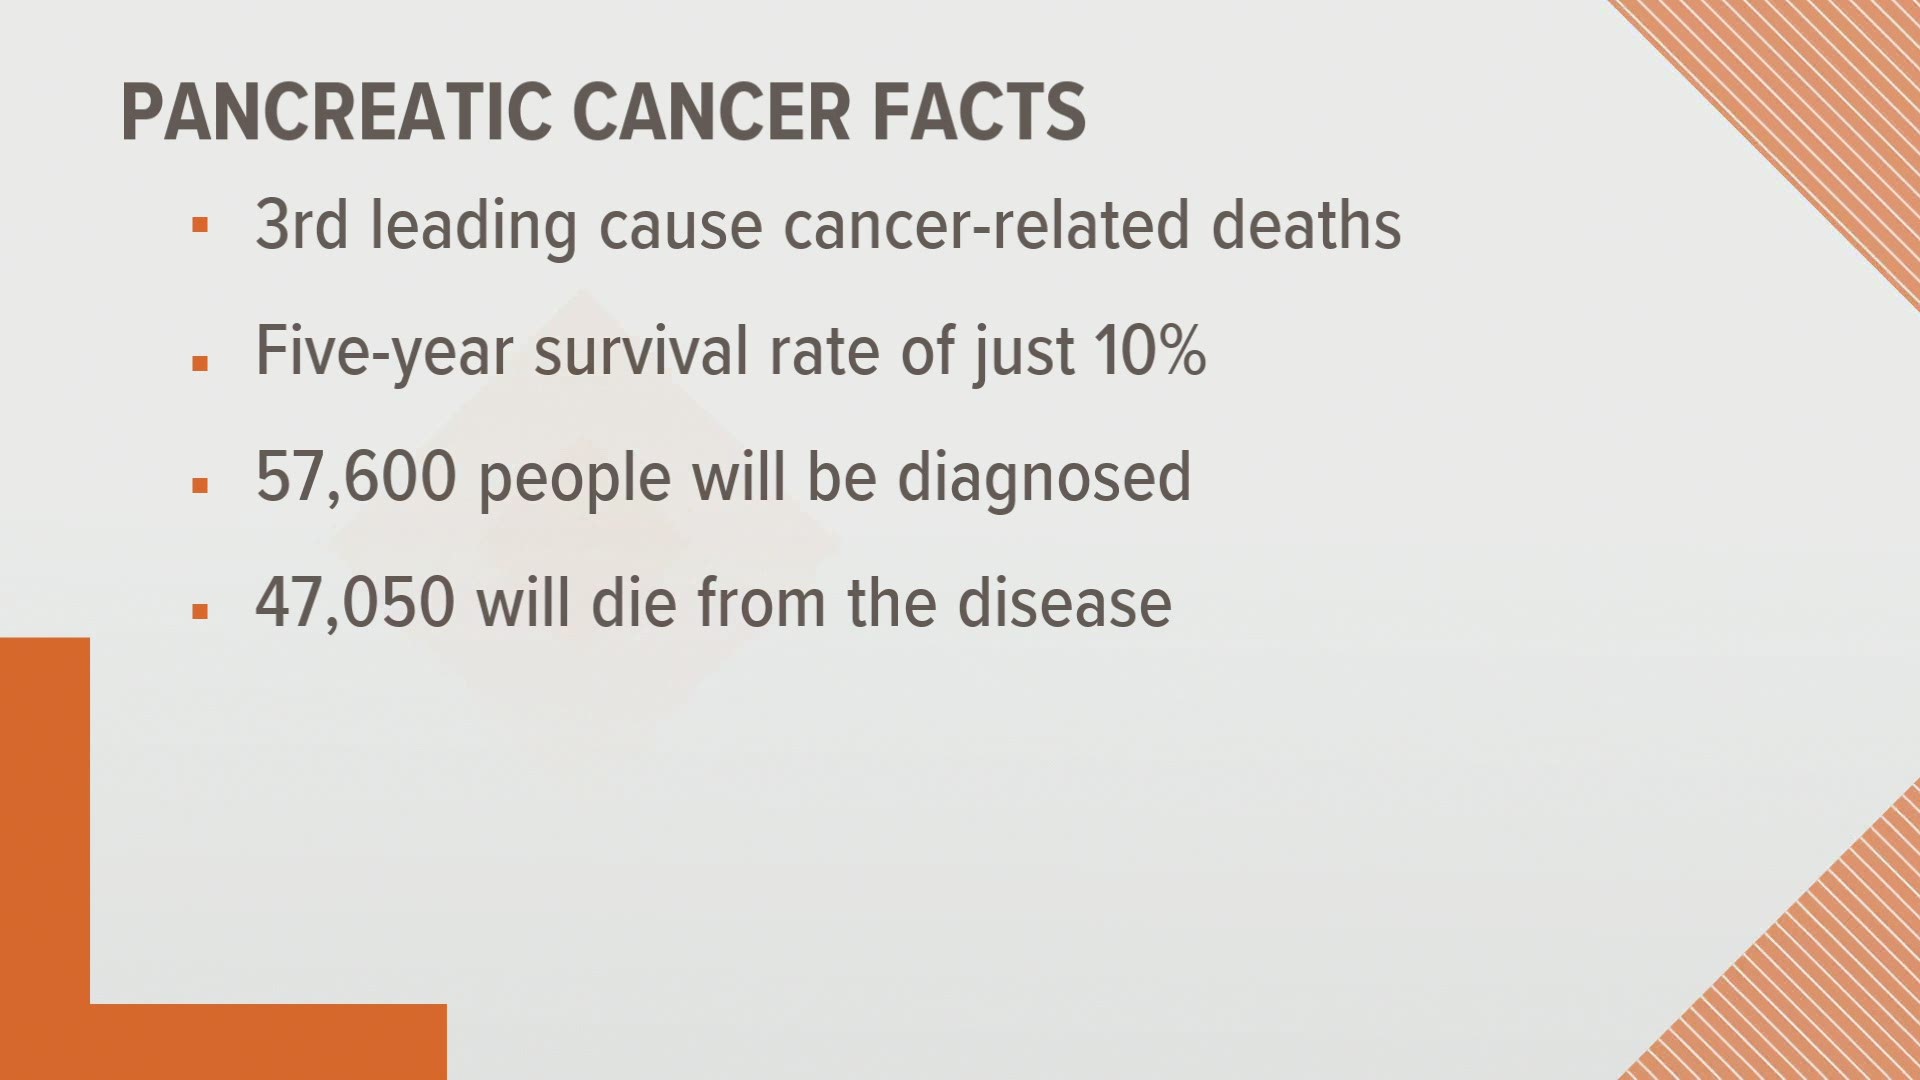 The disease has a five-year survival rate of 10%.